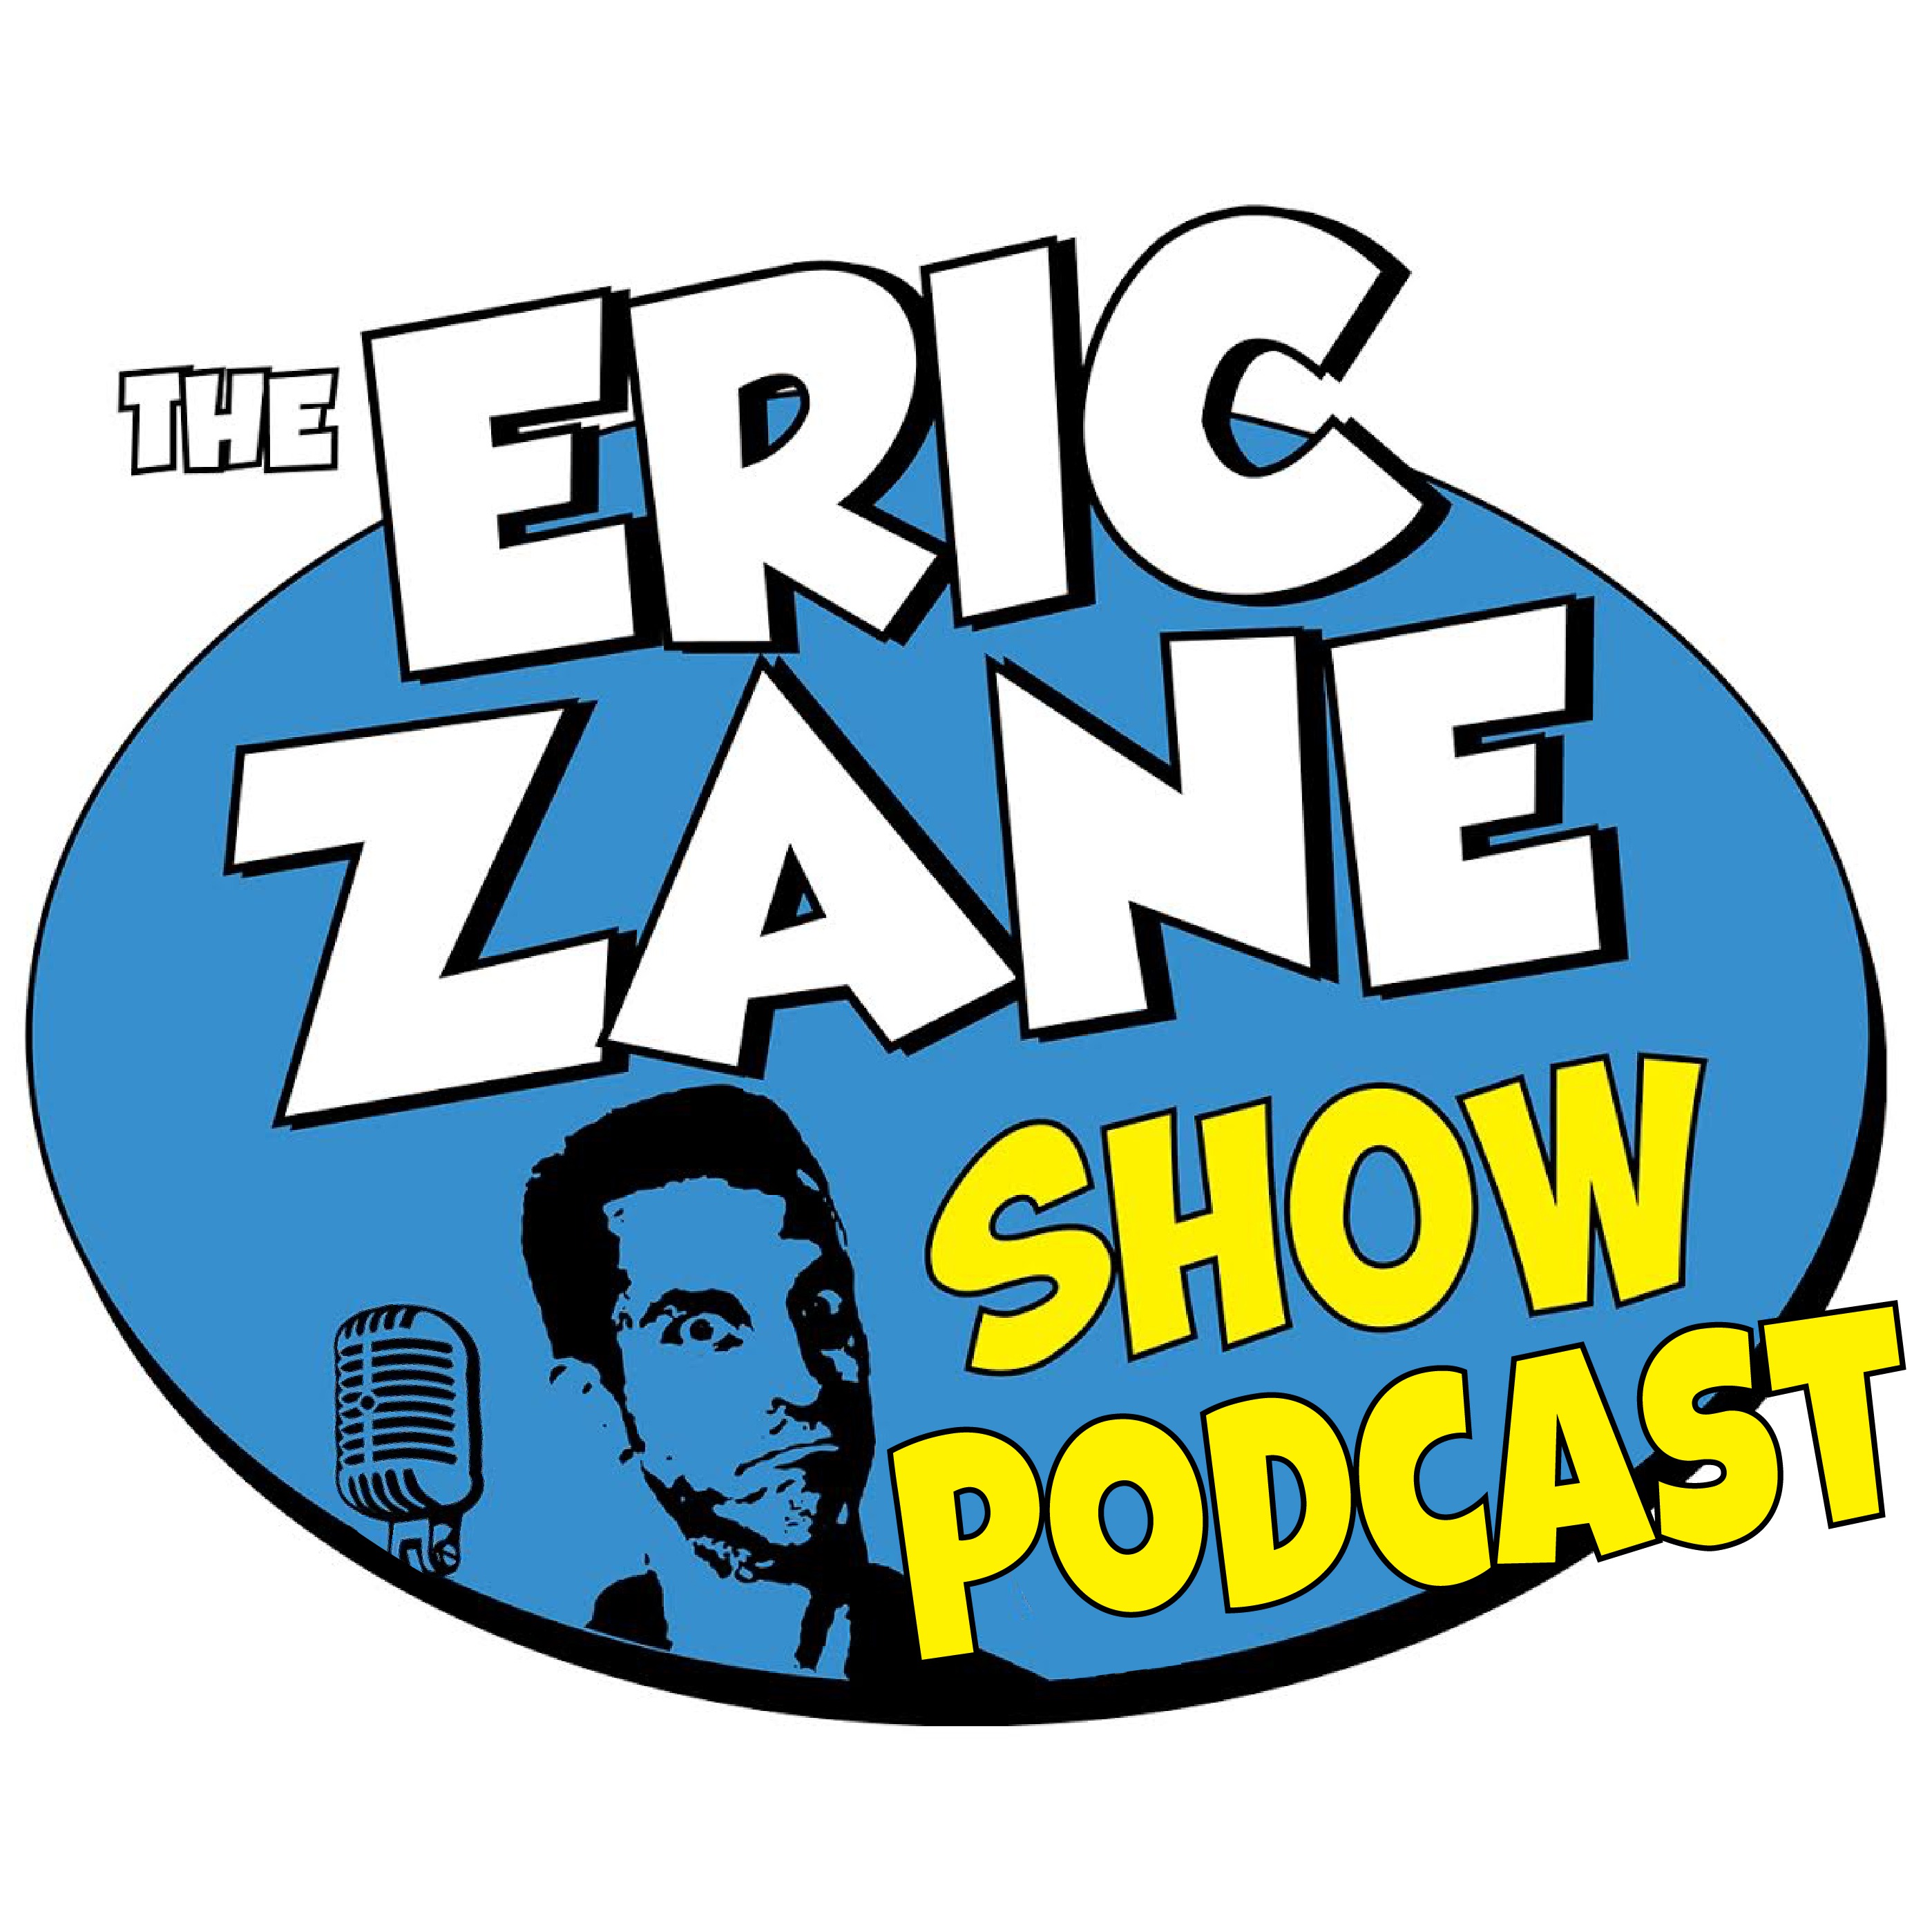 Eric Zane Show Podcast 965 - Definition of A 